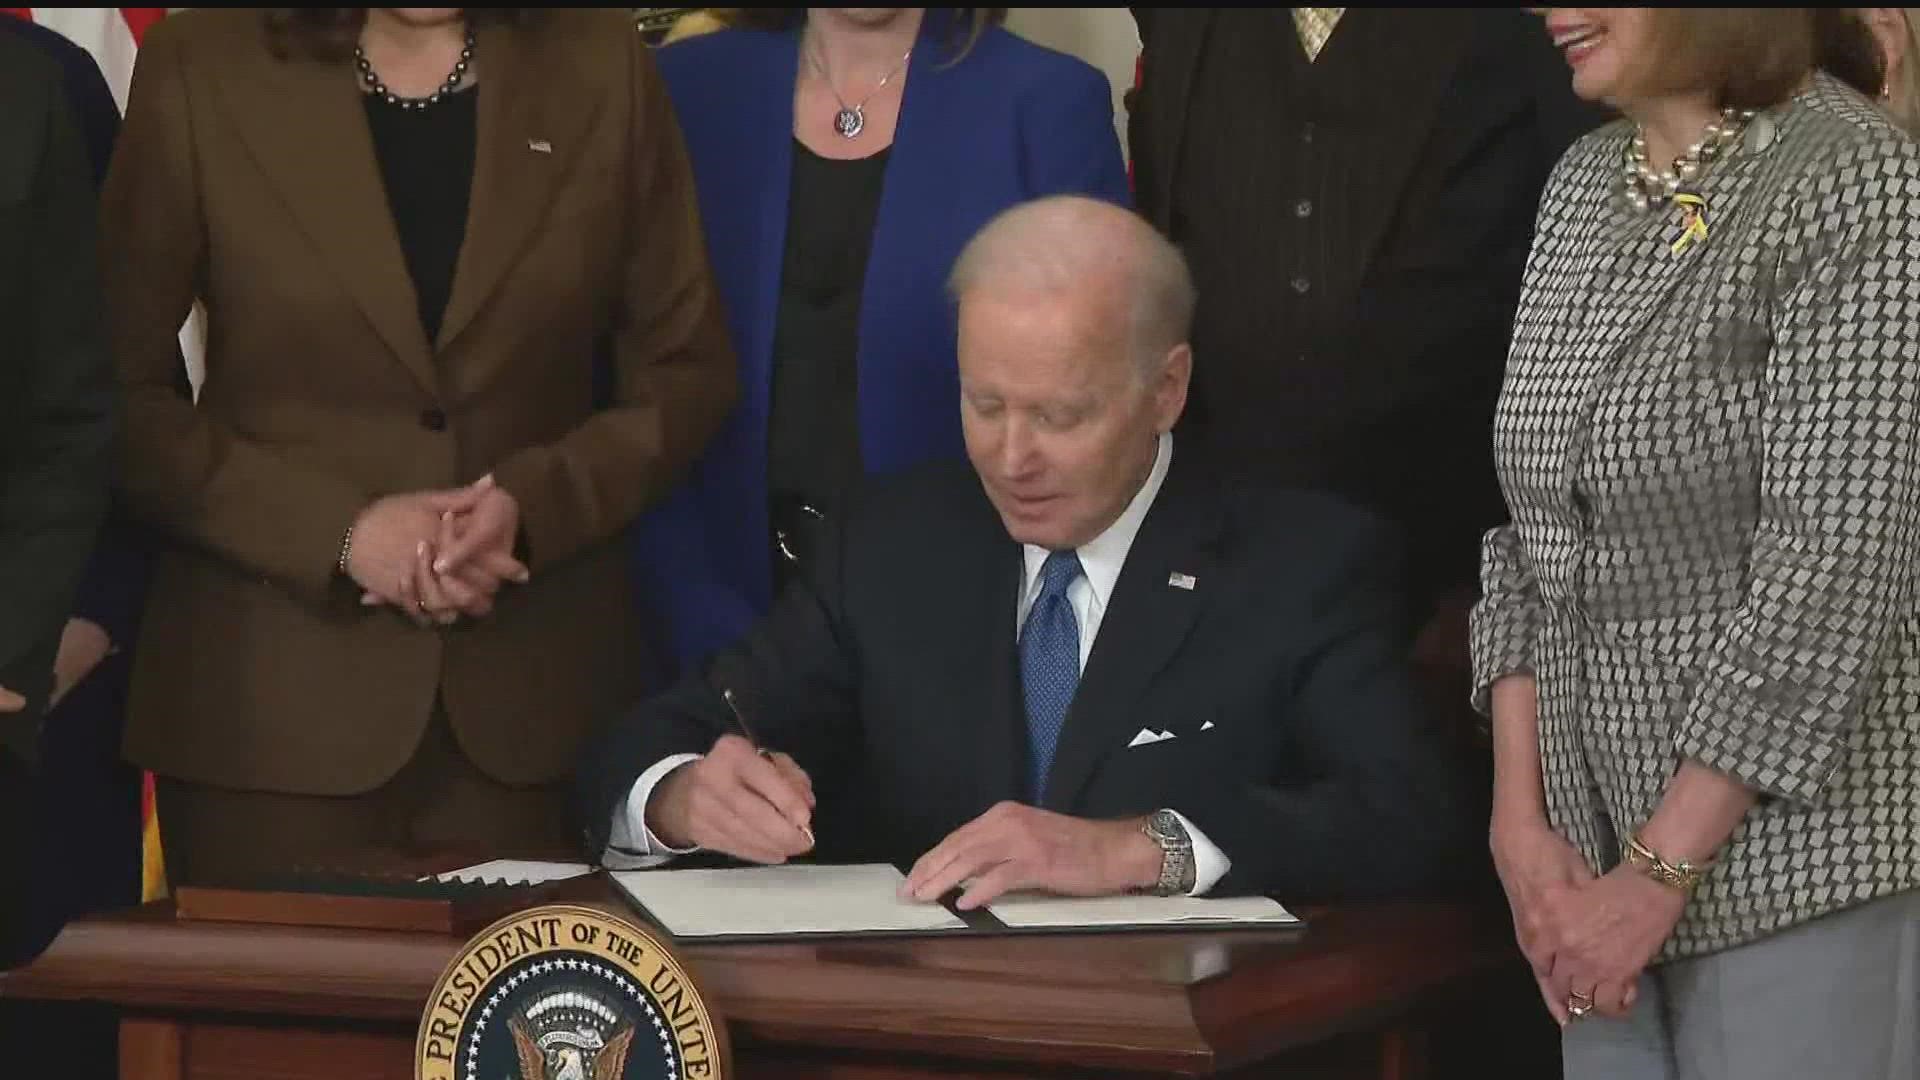 Biden also highlighted efforts to close a “family glitch” in implementation of the law, that his administration thinks will help 200,000 more people get health care.